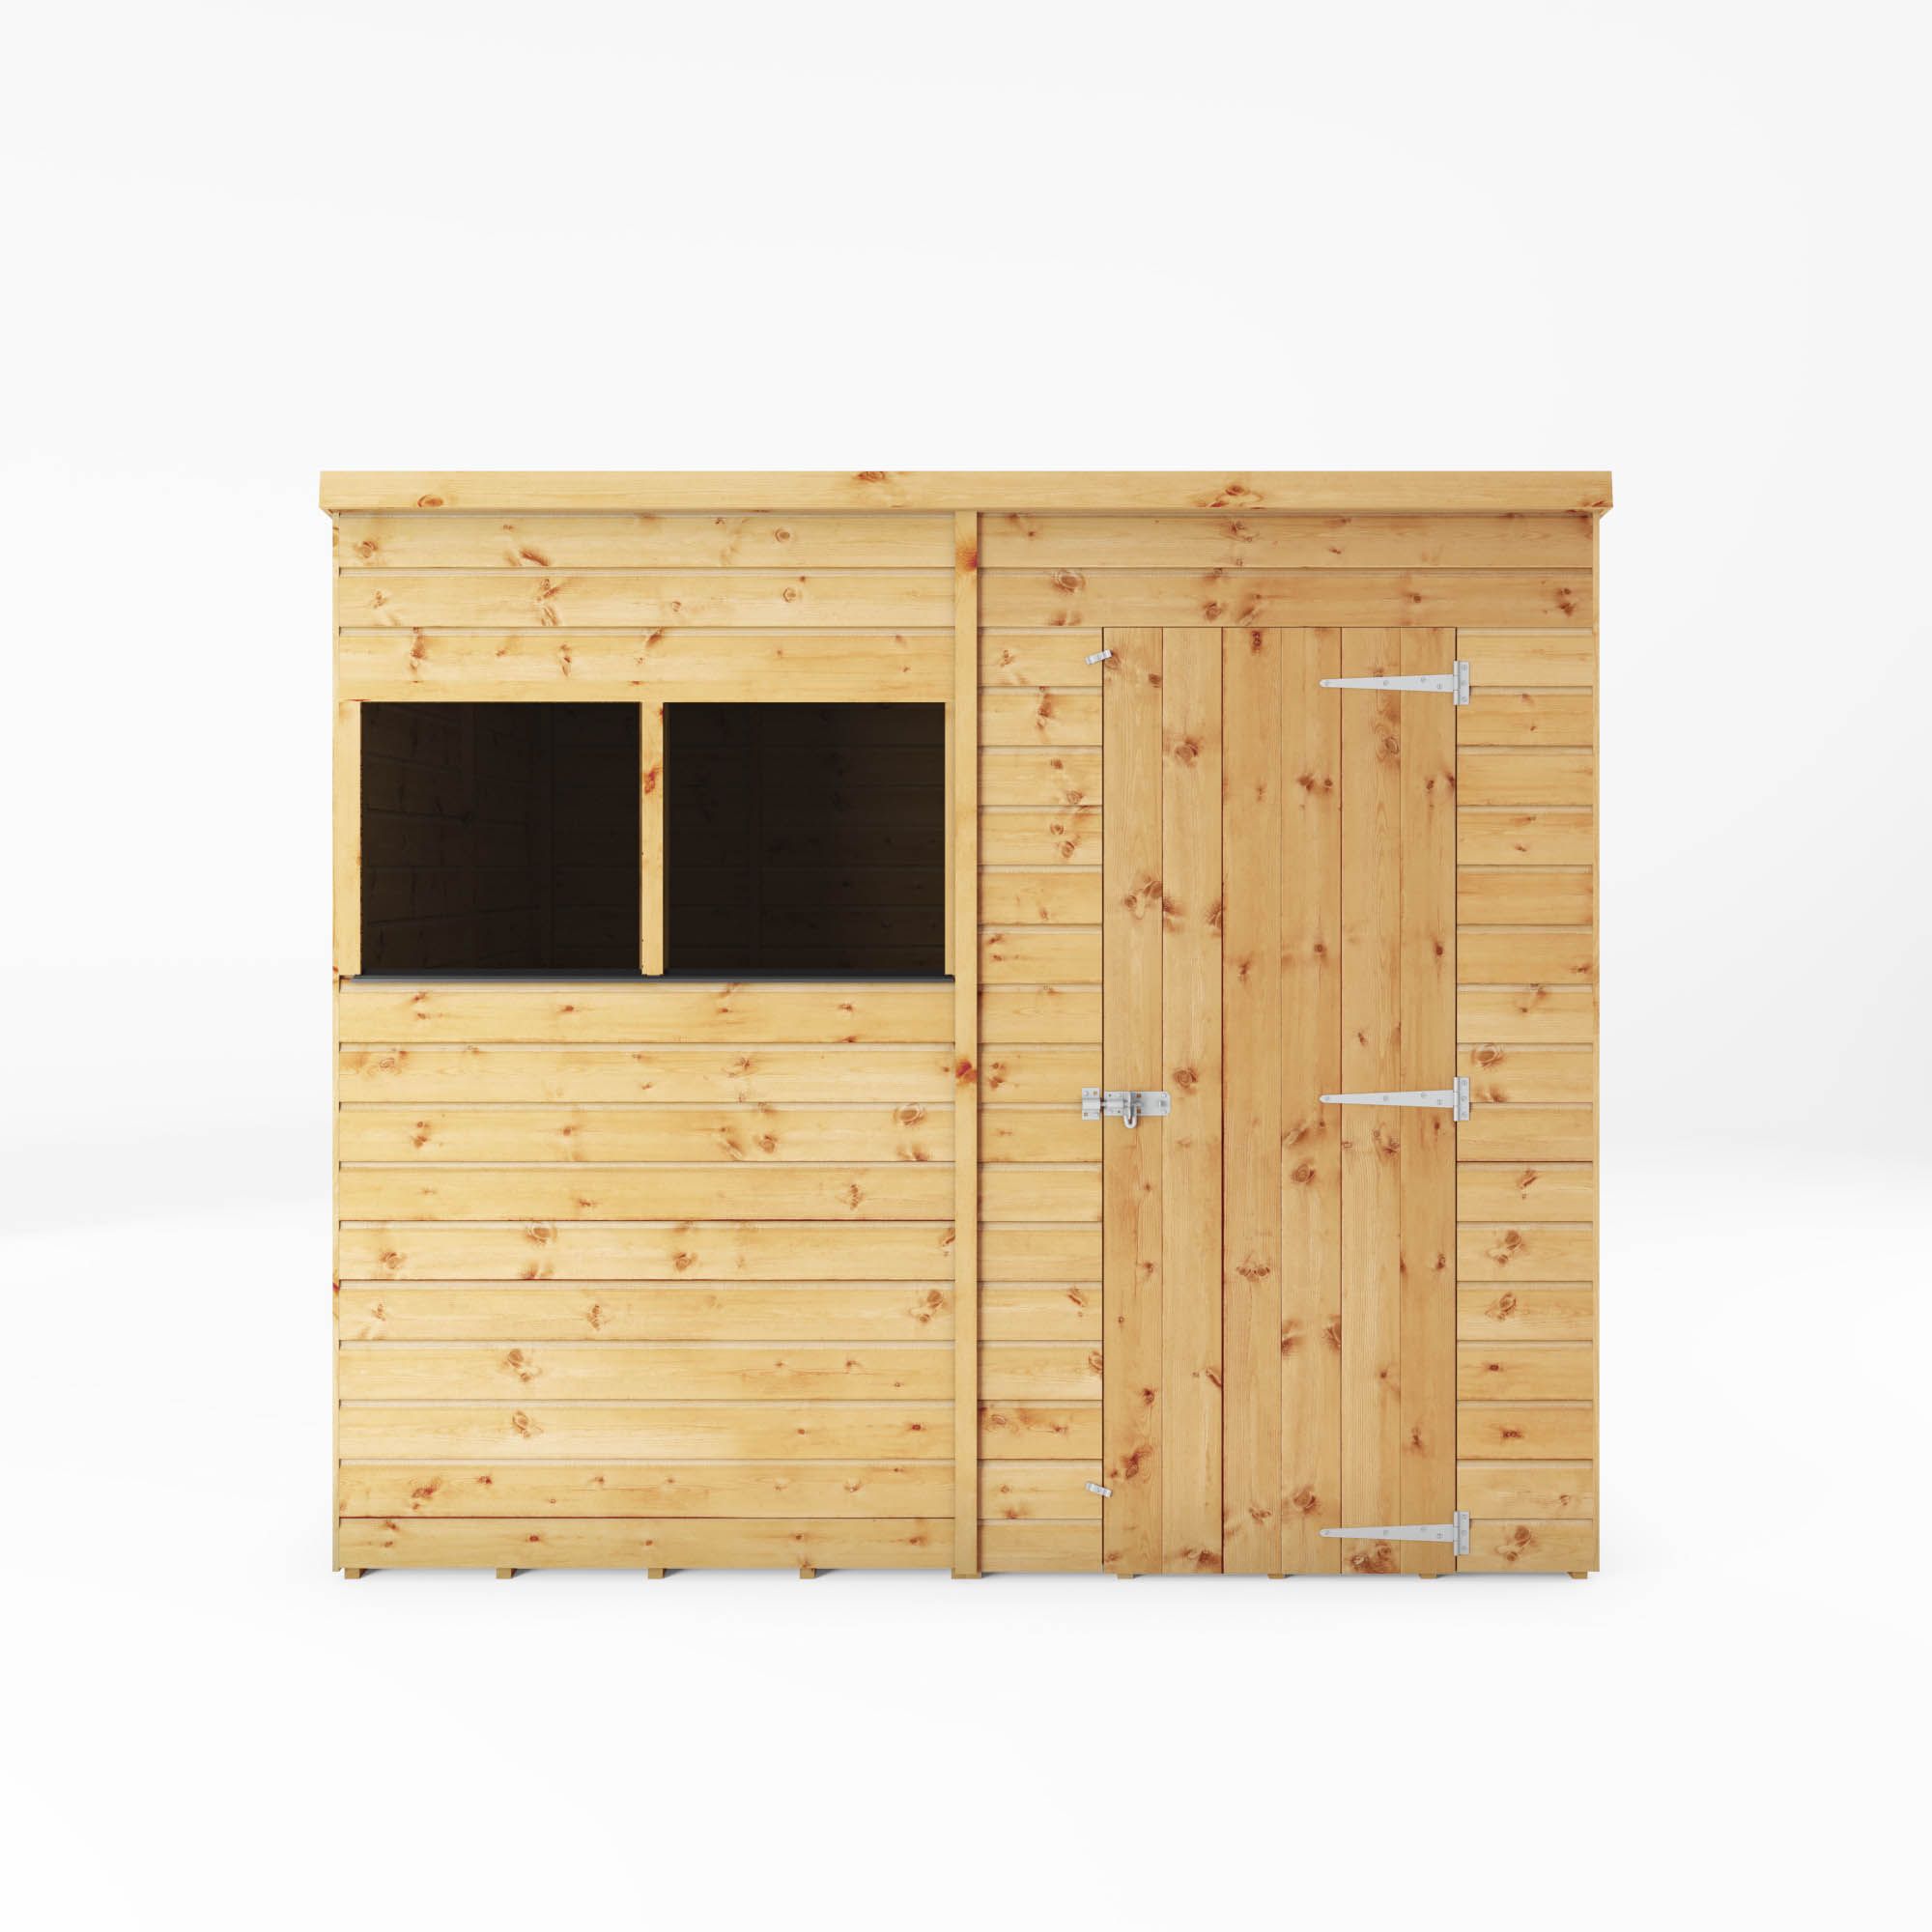 Mercia Premium 8x6 ft Pent Wooden Shed with floor & 2 windows